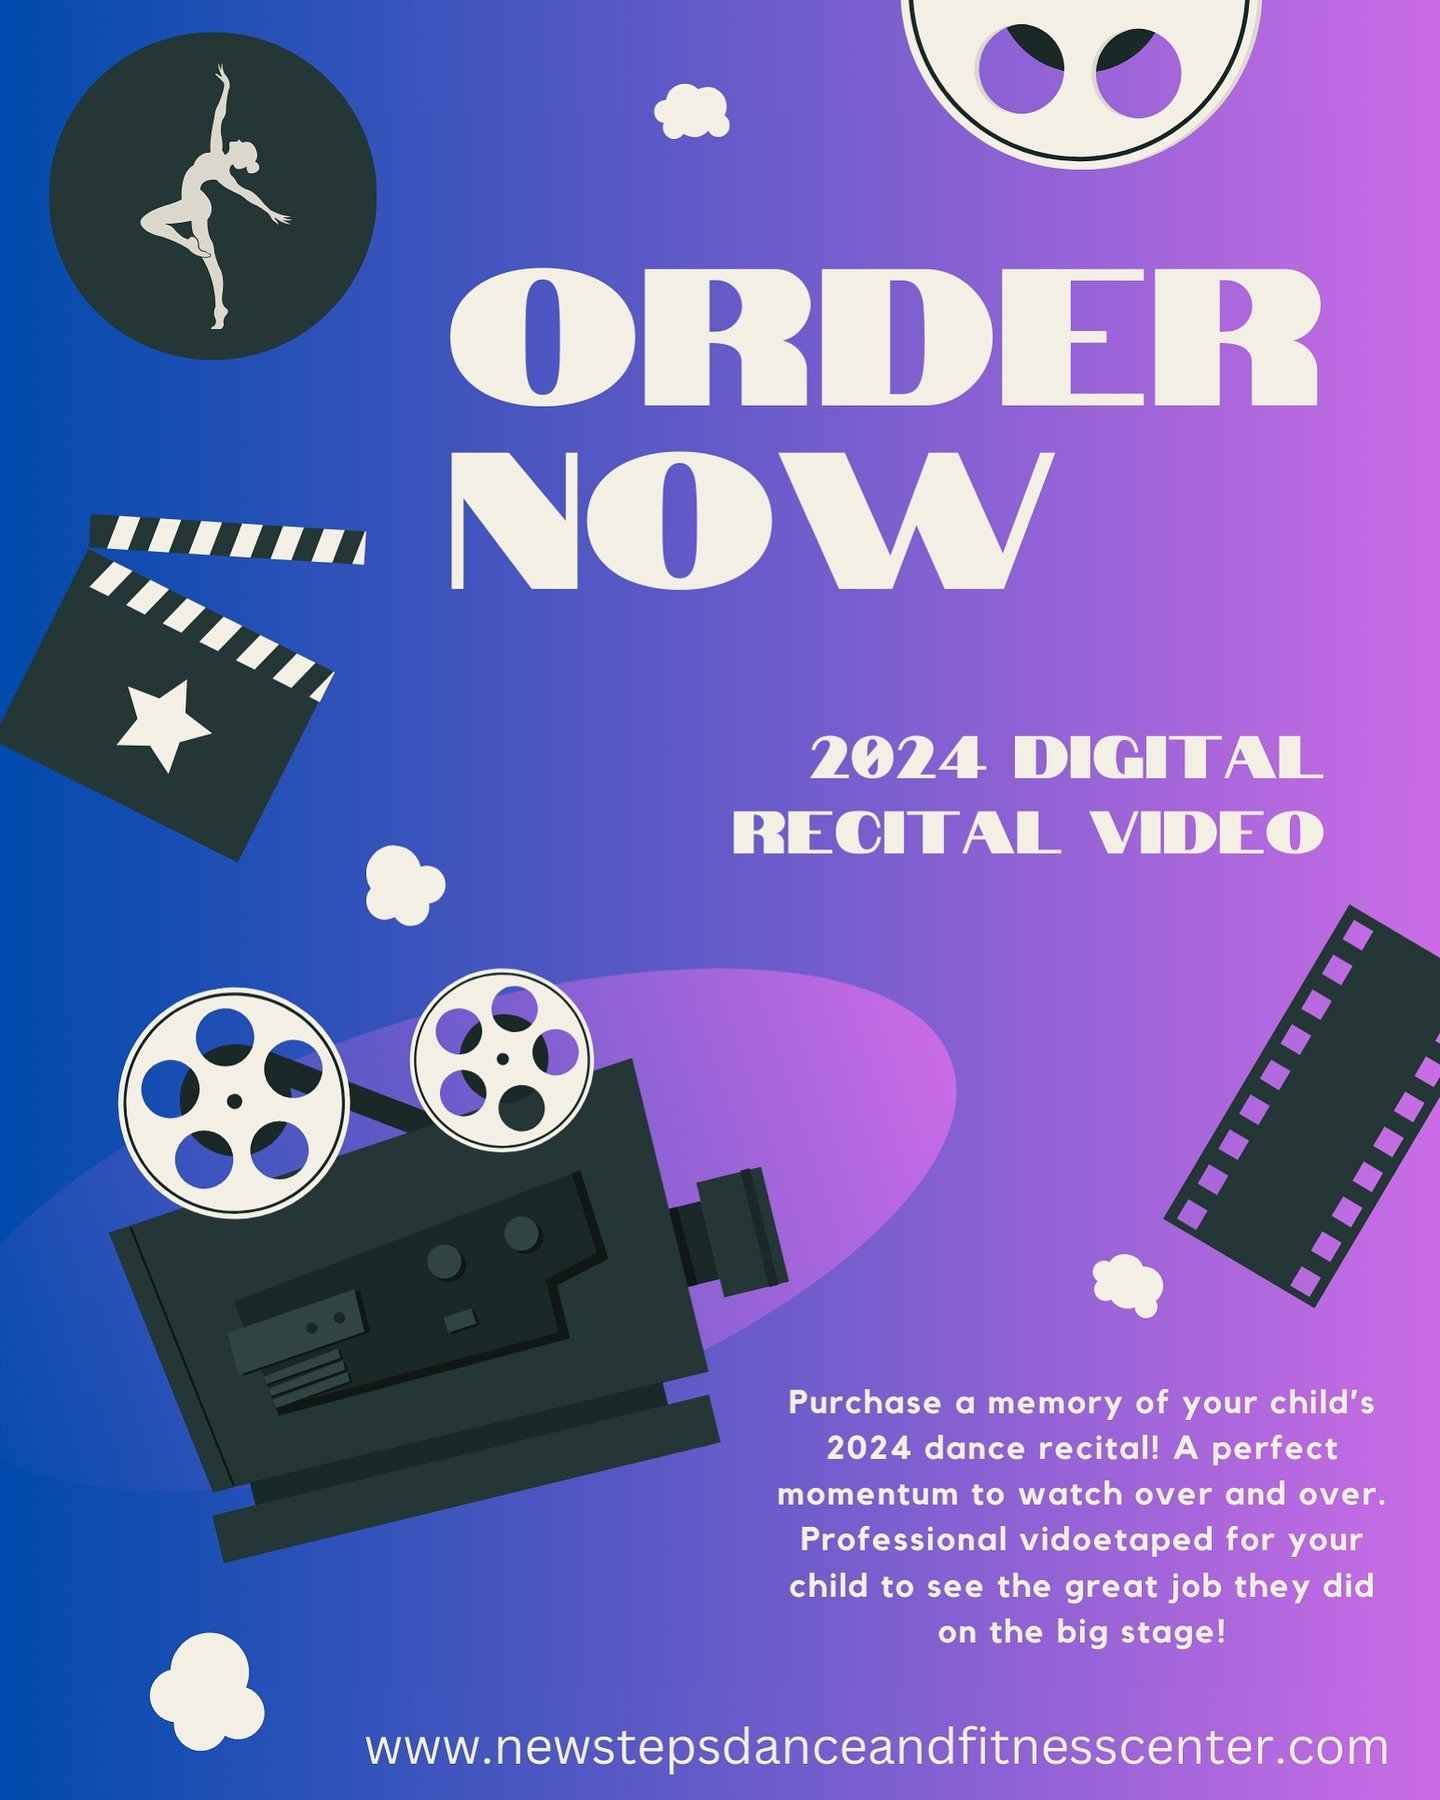 🎥Purchase a memory of your child&rsquo;s 2024 dance recital!🎞️

A perfect momentum to watch over and over. Professional vidoetaped for your child to see the great job they did on the big stage! 🌟 Link in bio 

#newstepsdancefitness #keepdancing #d